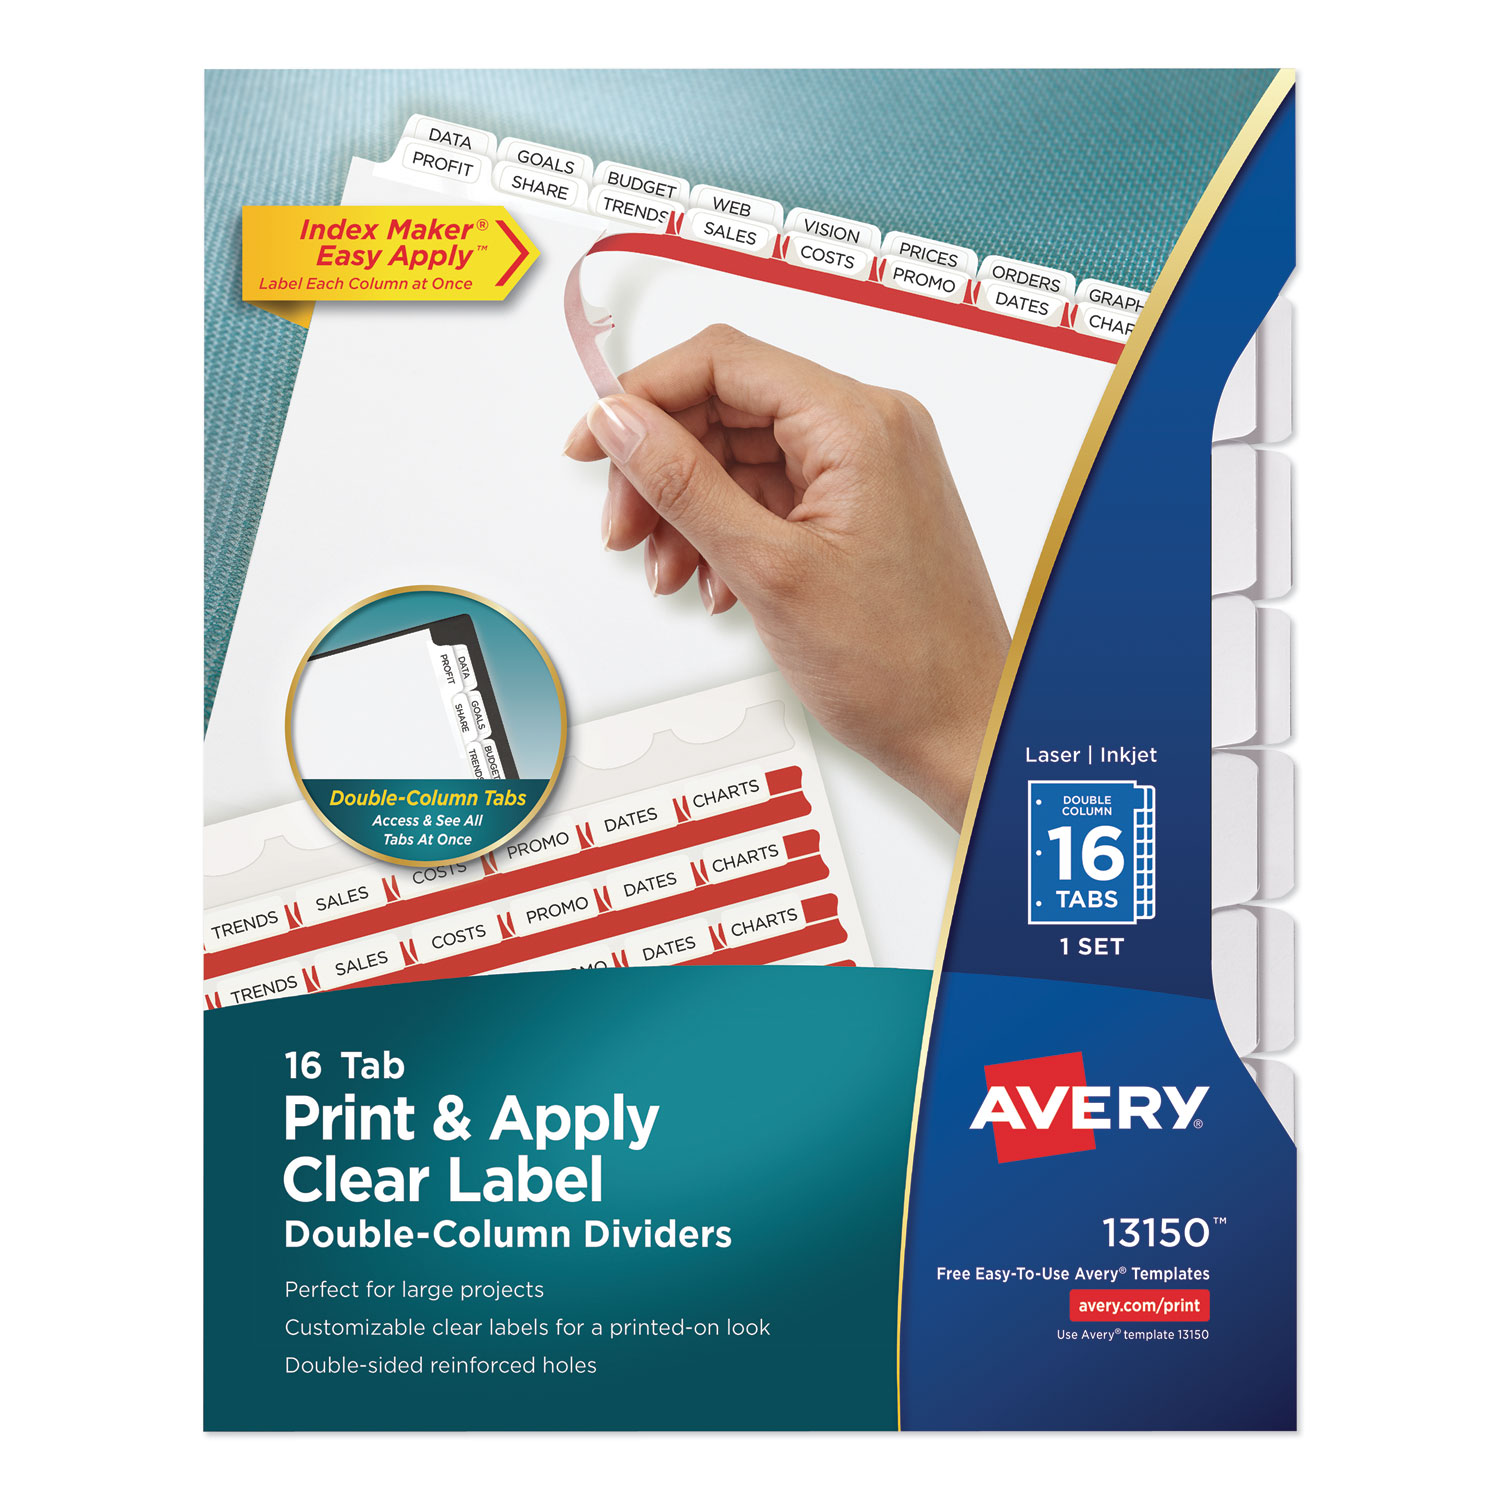  Avery 13150 Index Maker Print & Apply Clear Label Double Column Dividers, 16-Tab, Letter (AVE13150) 